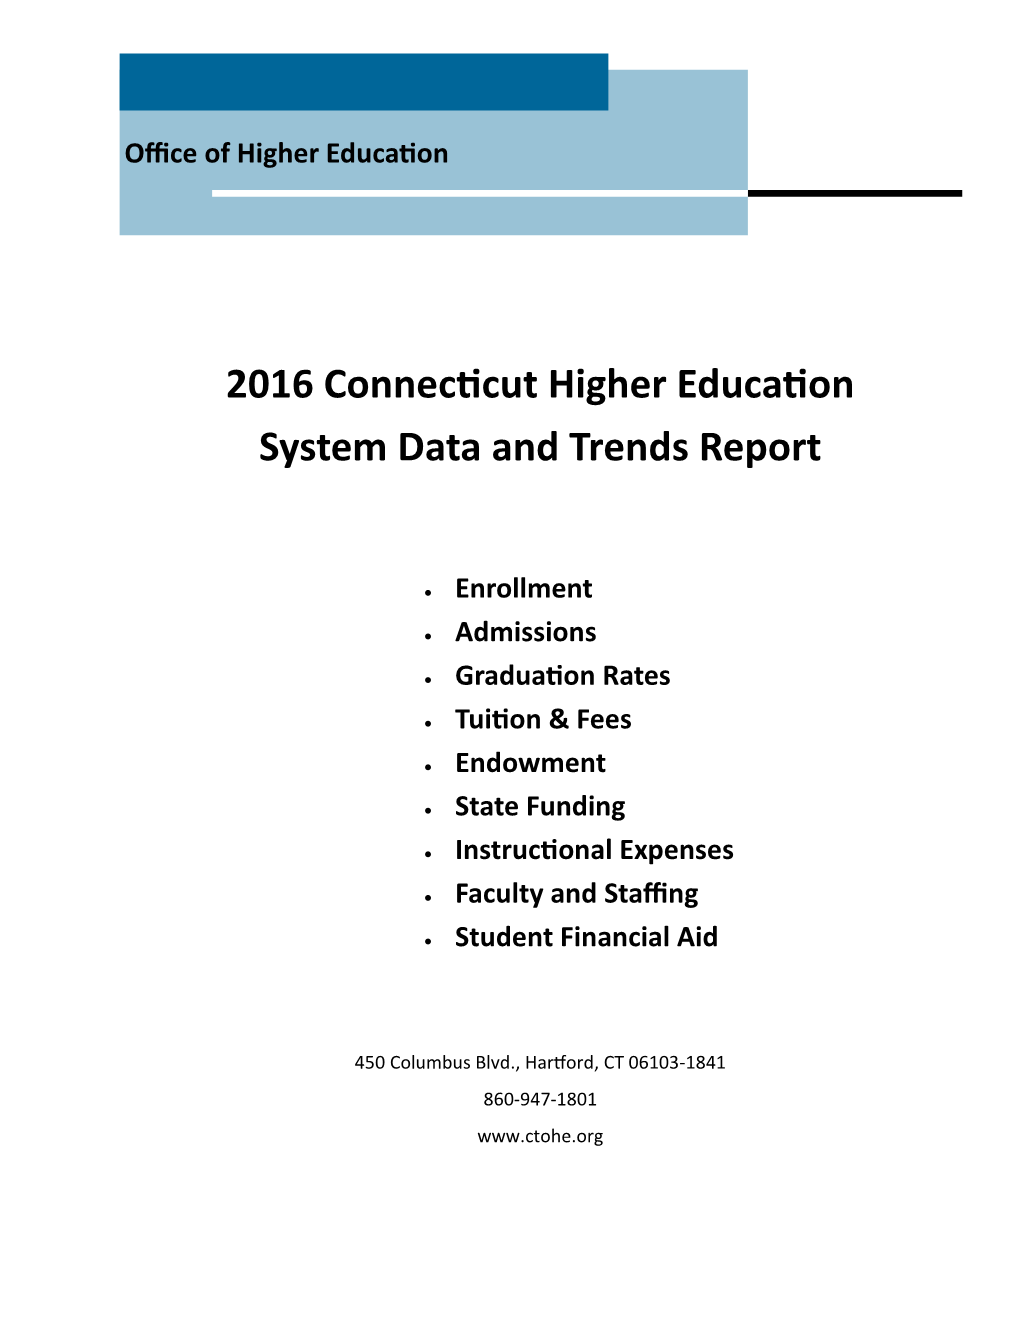 2016 Connecticut Higher Education System Data and Trends Report